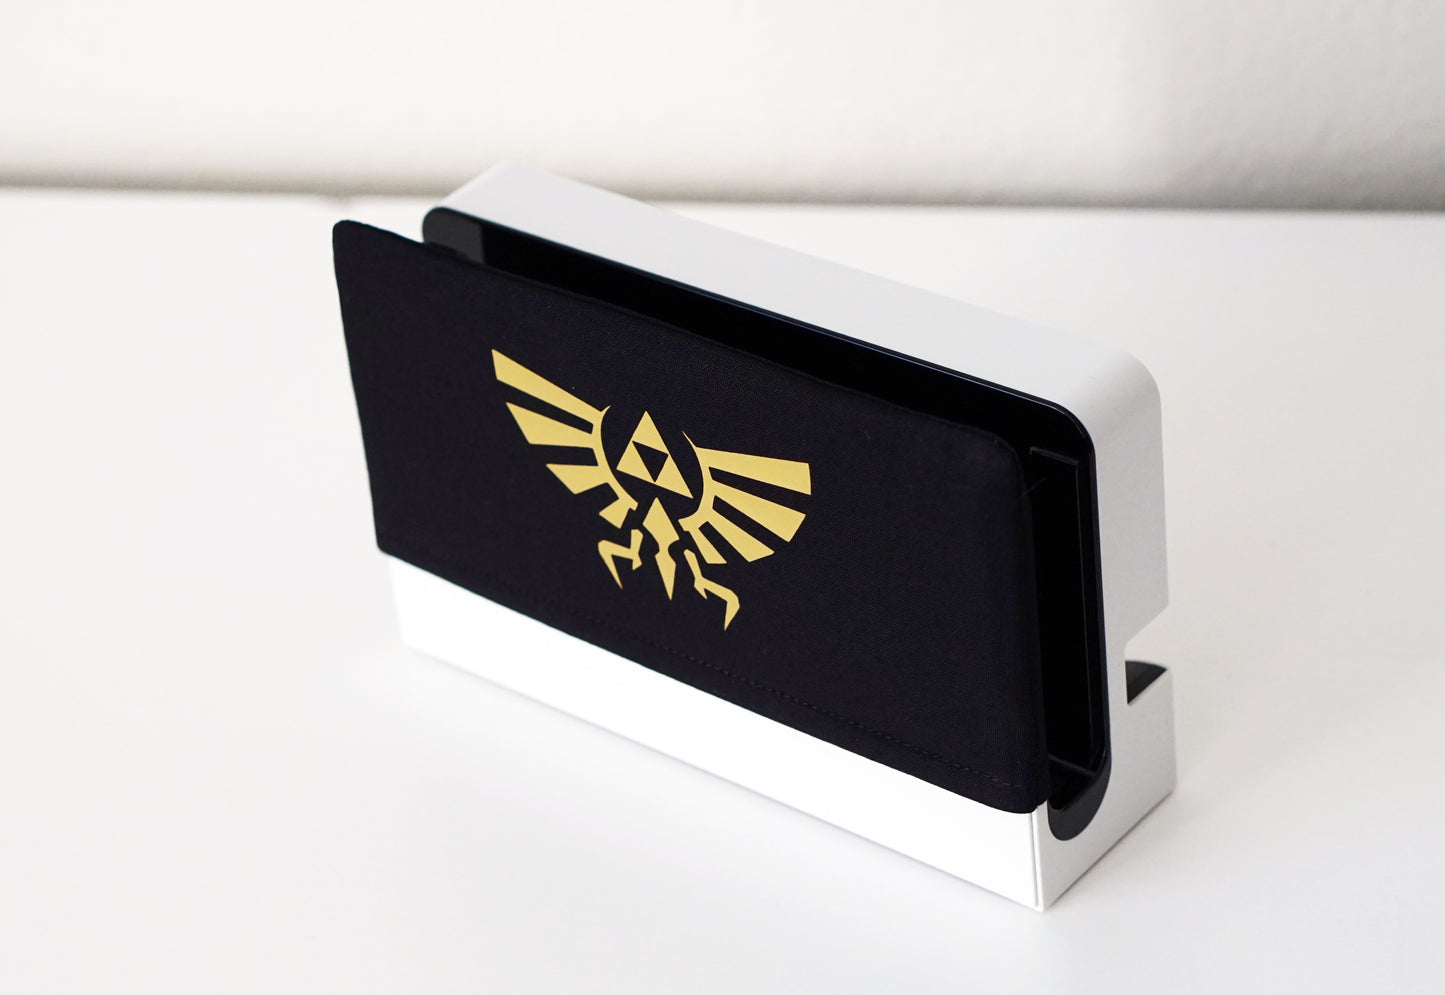 Gold Crest - Padded Dock Cover Made For Nintendo Switch